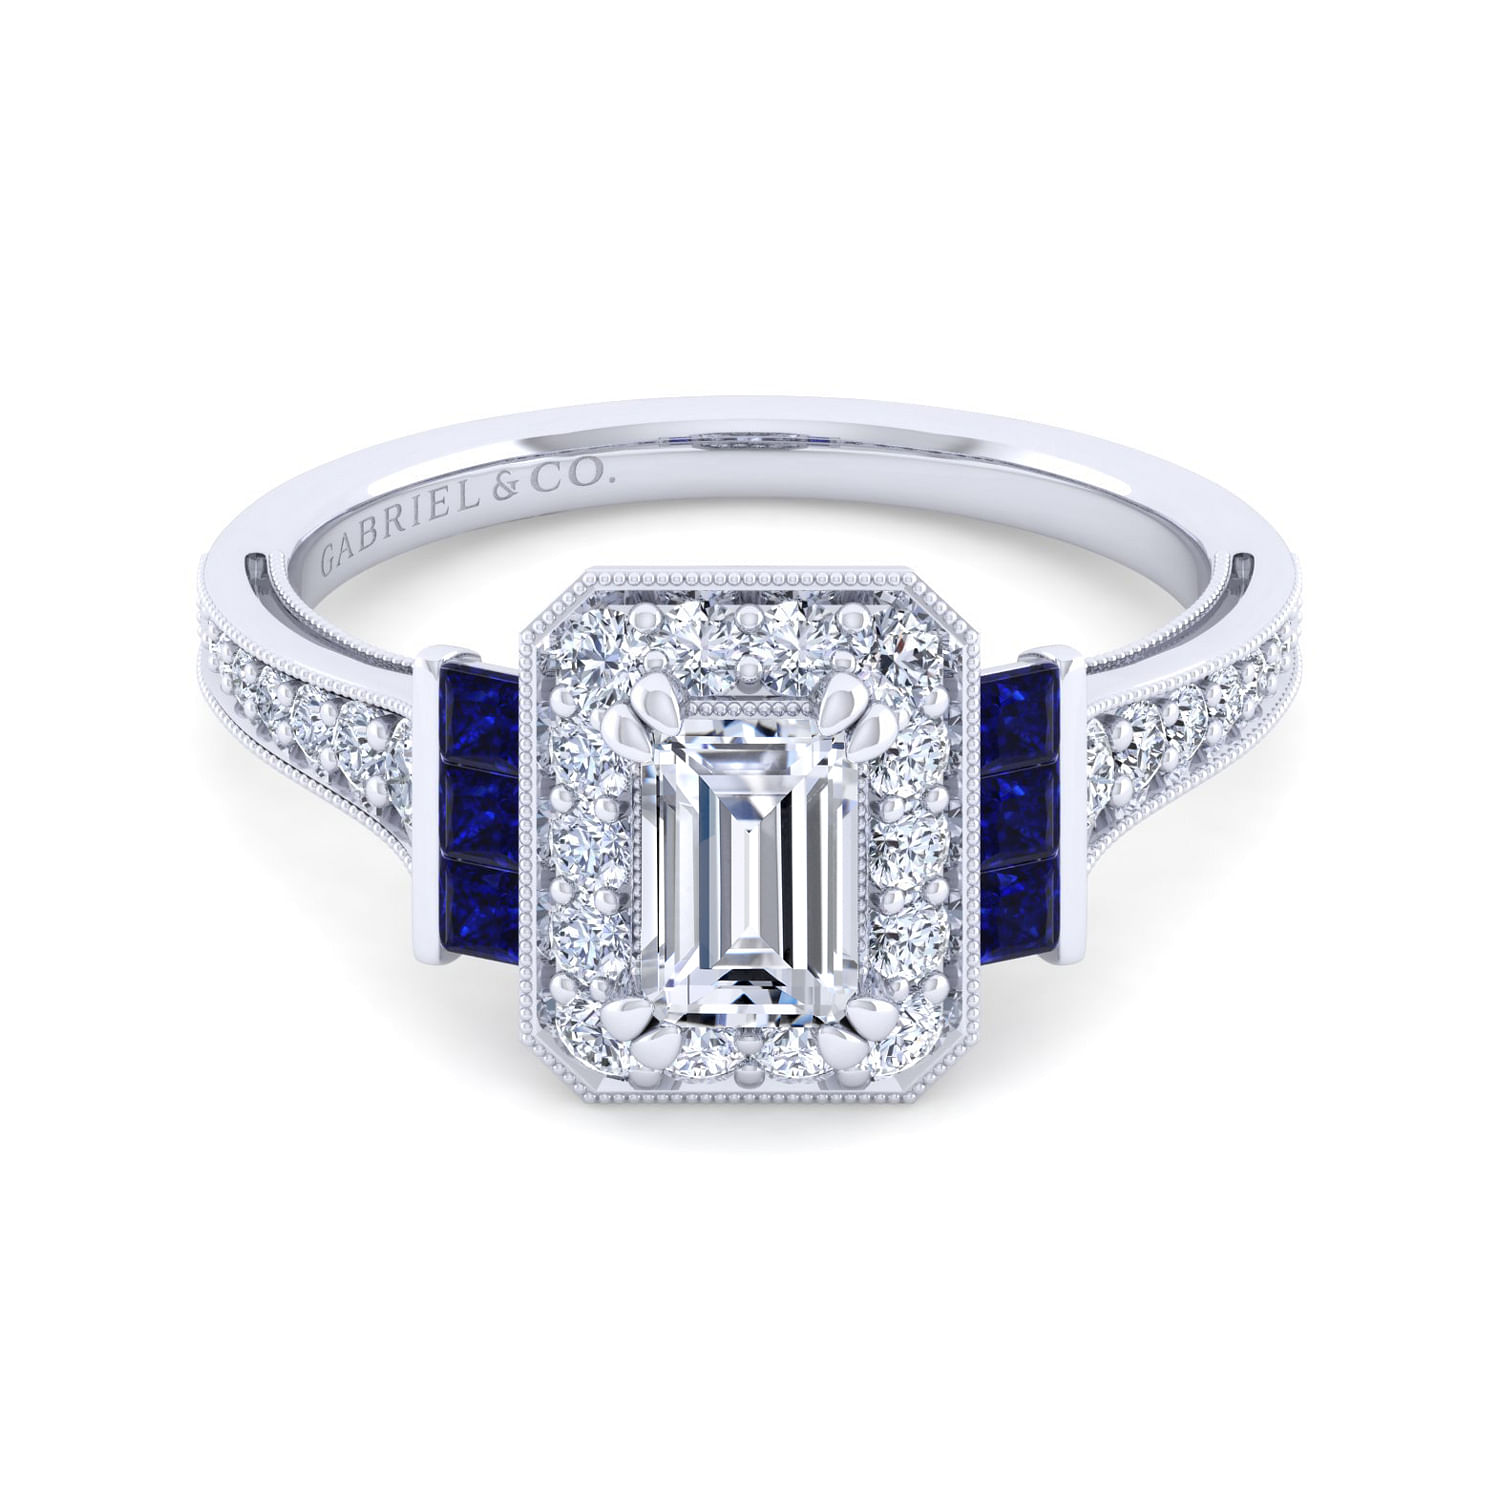 Sylvia - Vintage Inspired 14K White Gold Halo Emerald Cut Sapphire and Diamond Engagement Ring